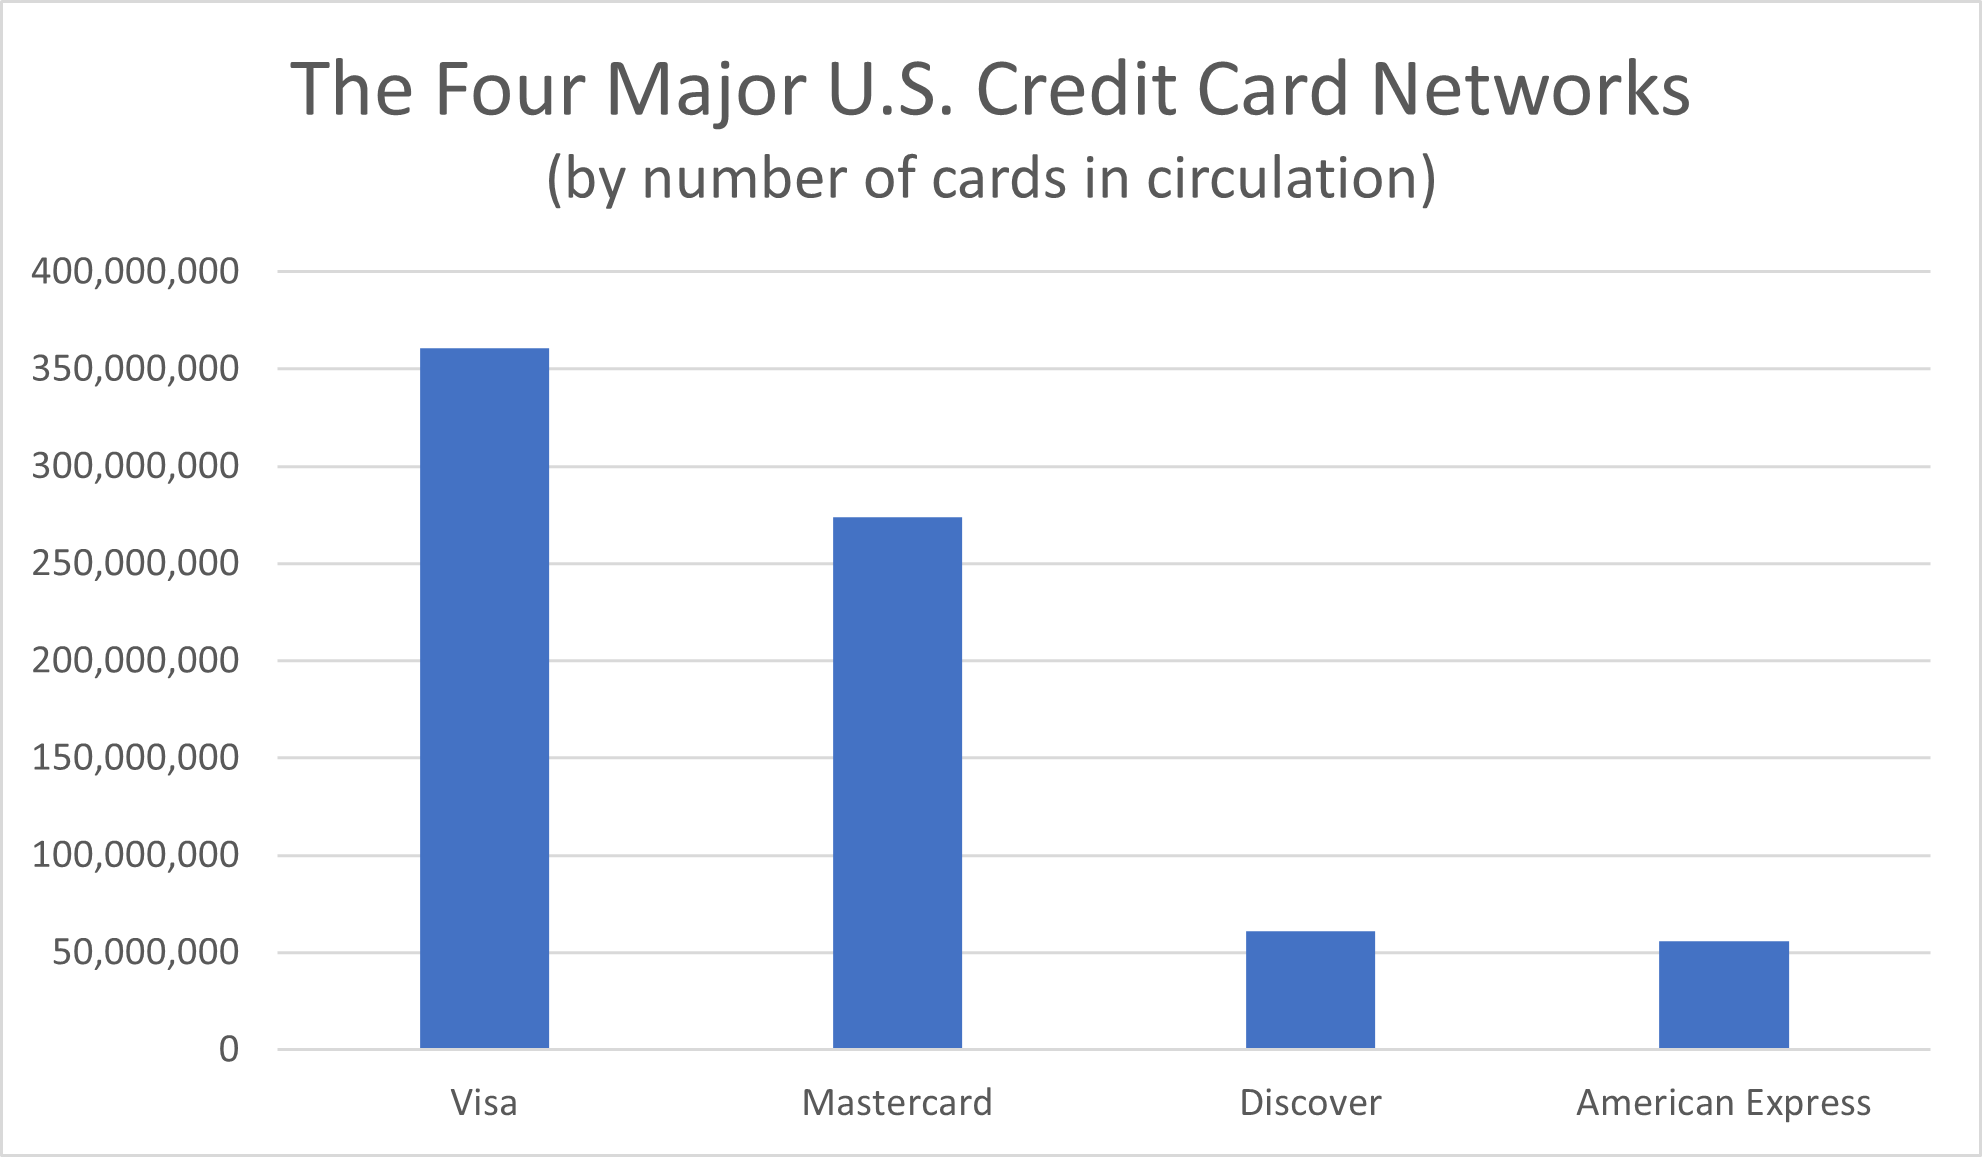 The Four Major U.S. Credit Card Networks (by number of cards in circulation)